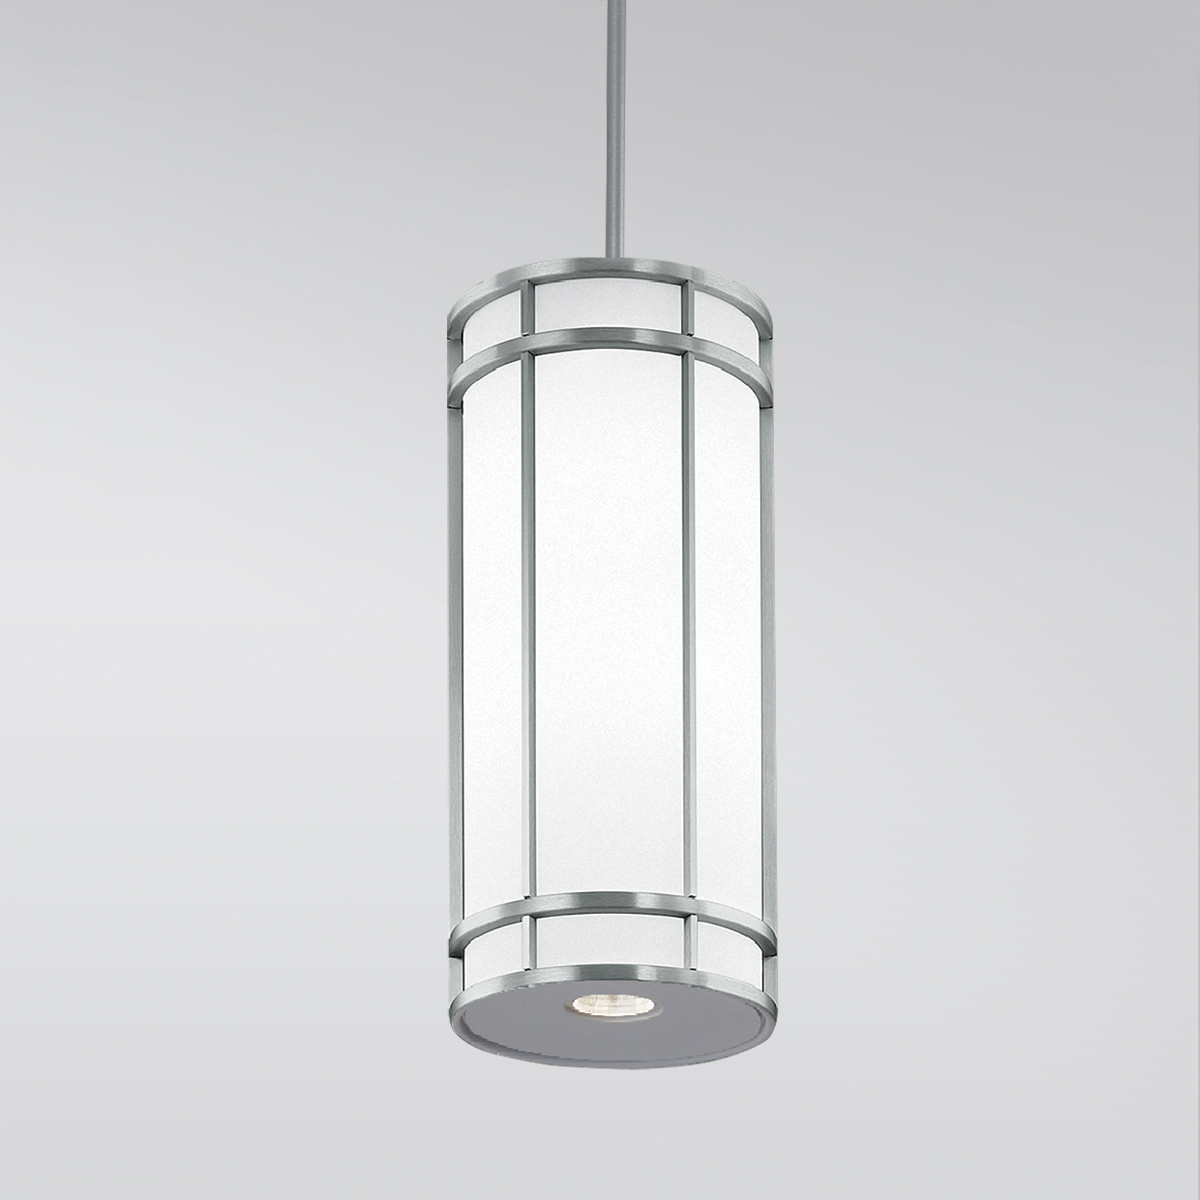 A large, luminous cylinder pendant with cross bar accent